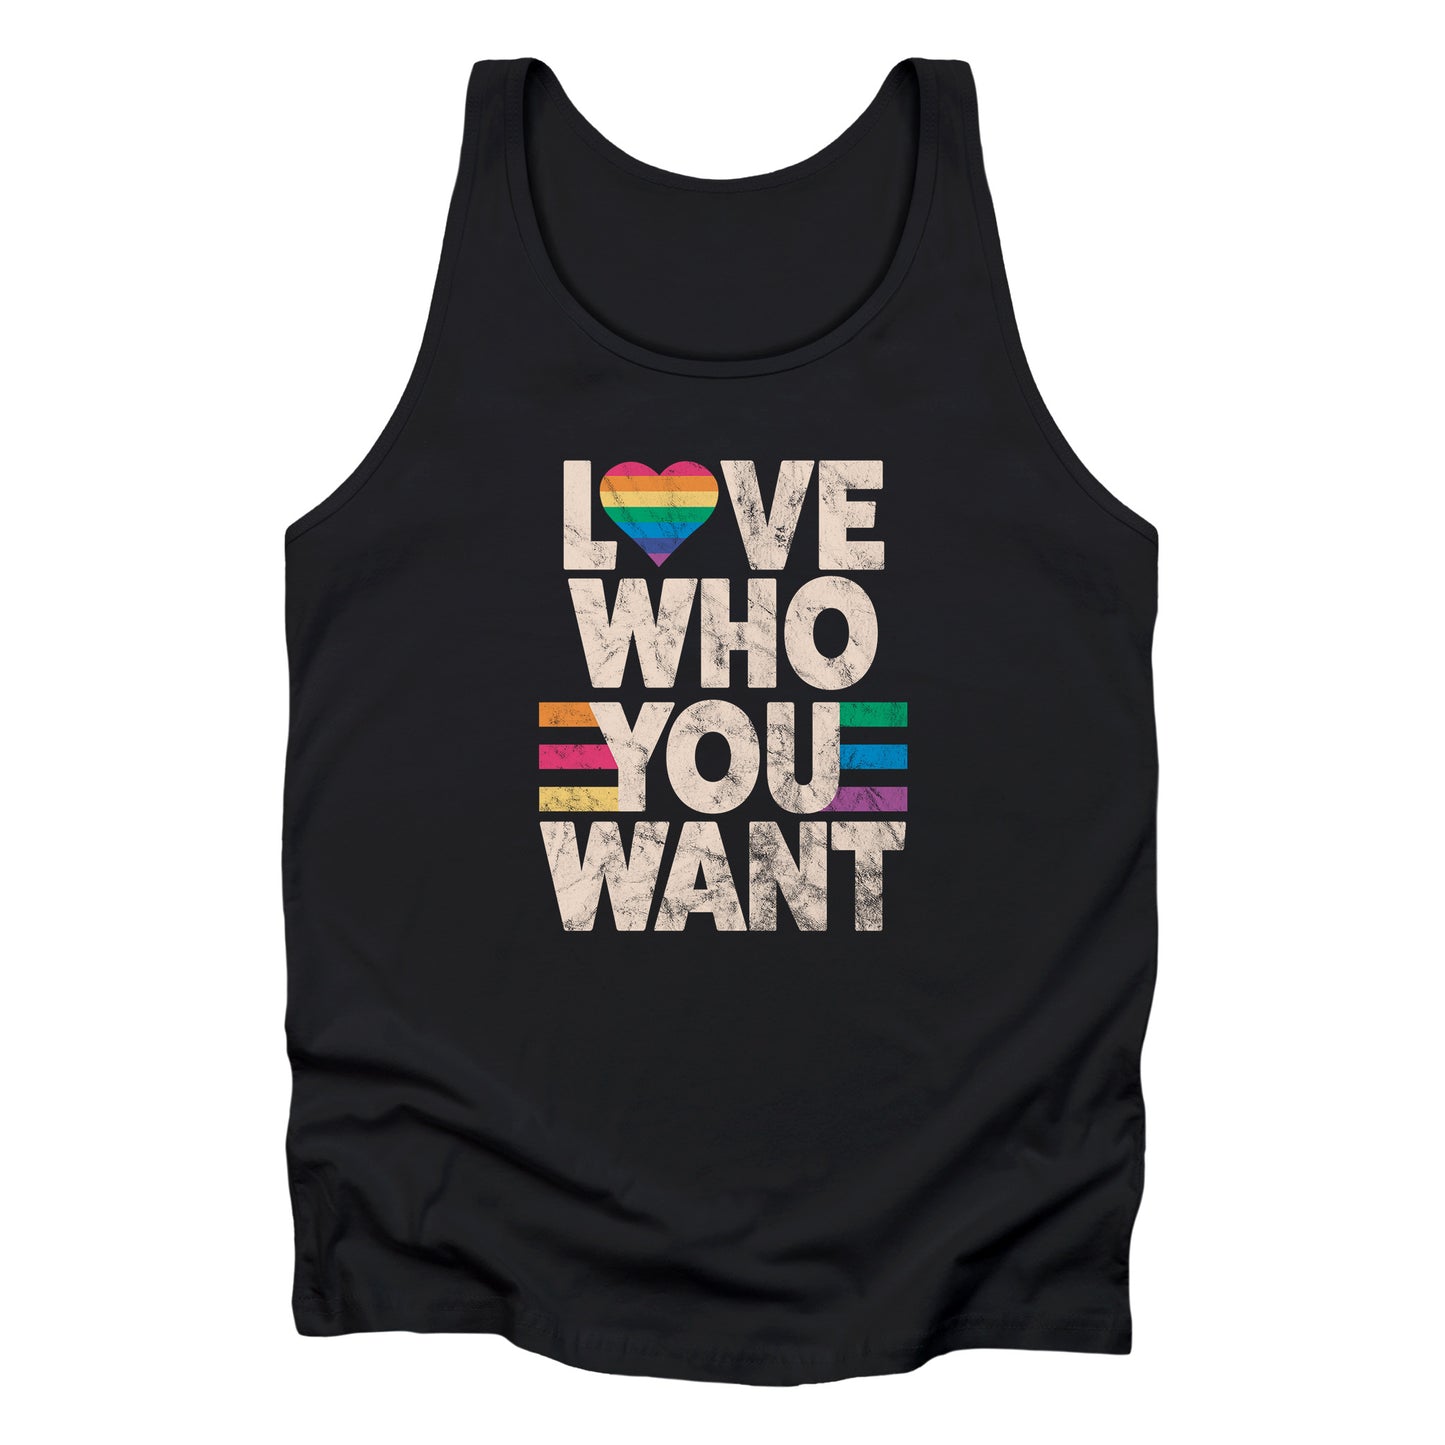 Black unisex tank top that says, “Love who you want” in all caps. Each word is on its own line. The “O” in “love” is a rainbow heart.